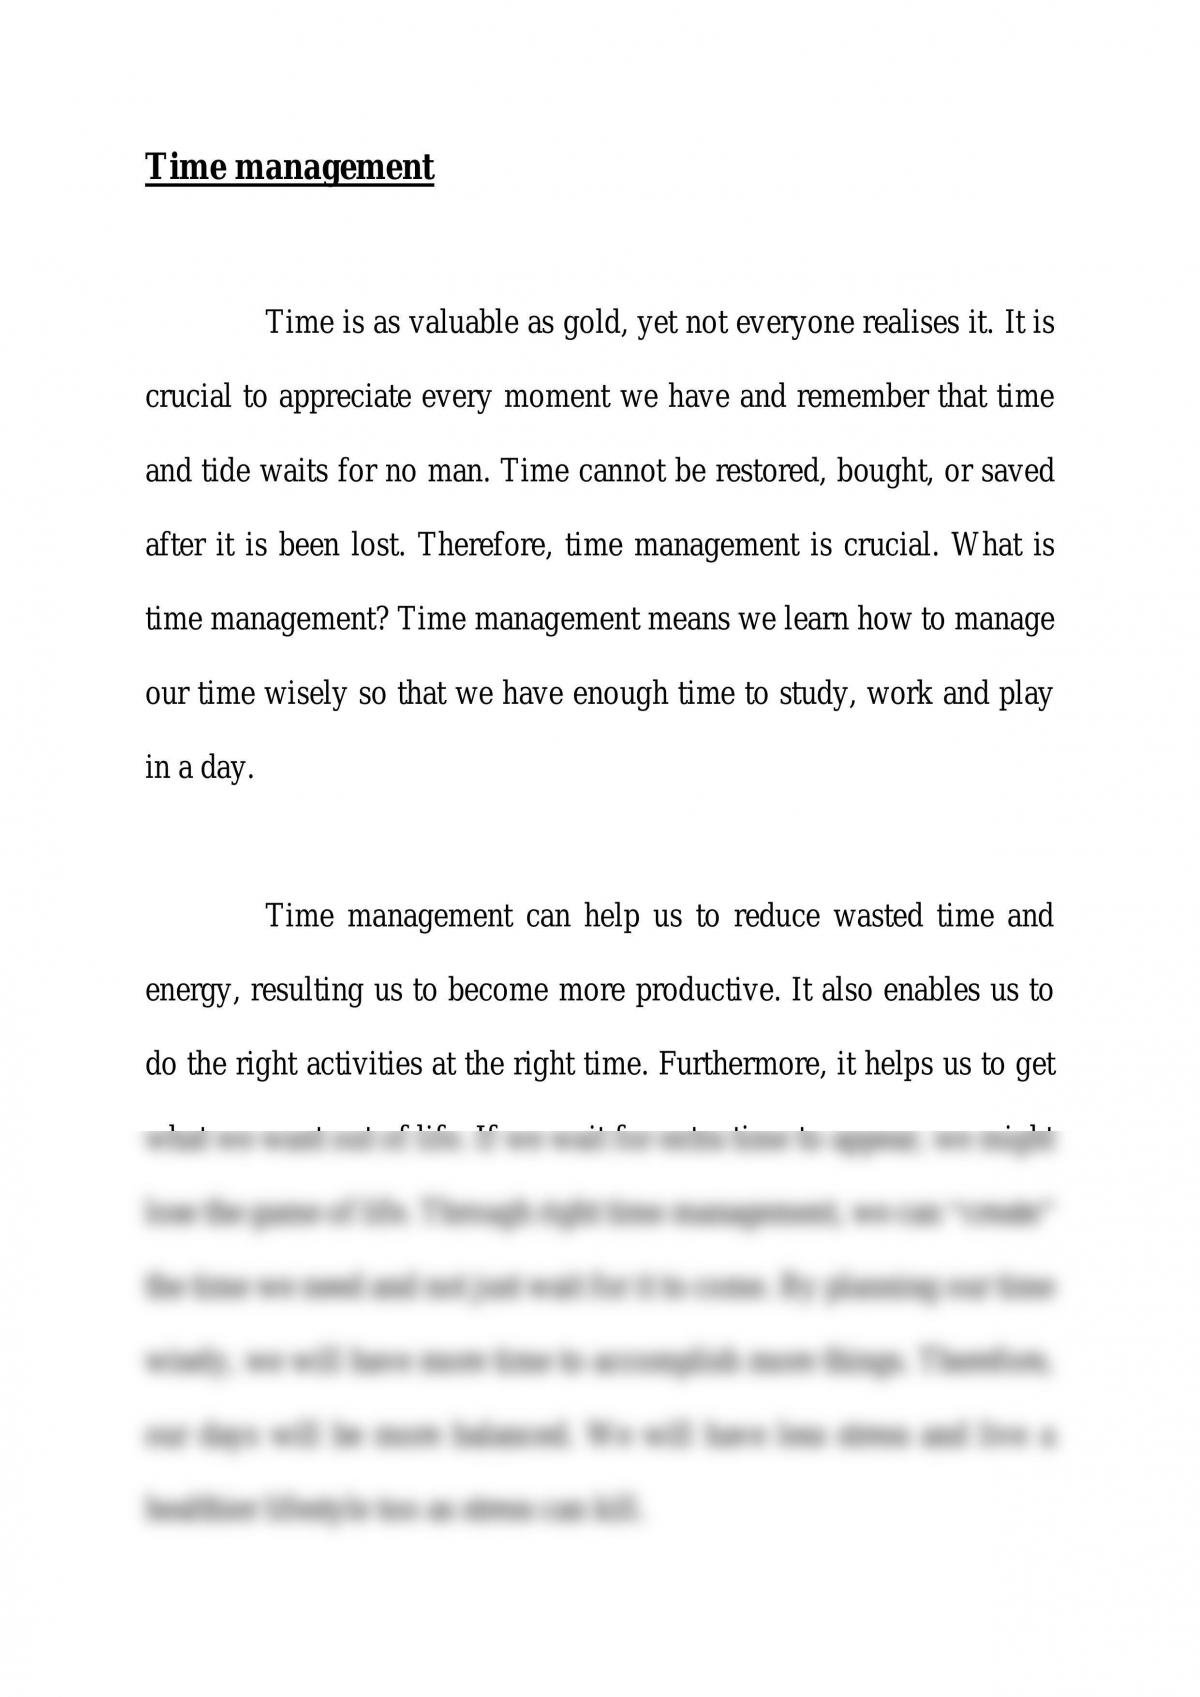 persuasive essay on time management